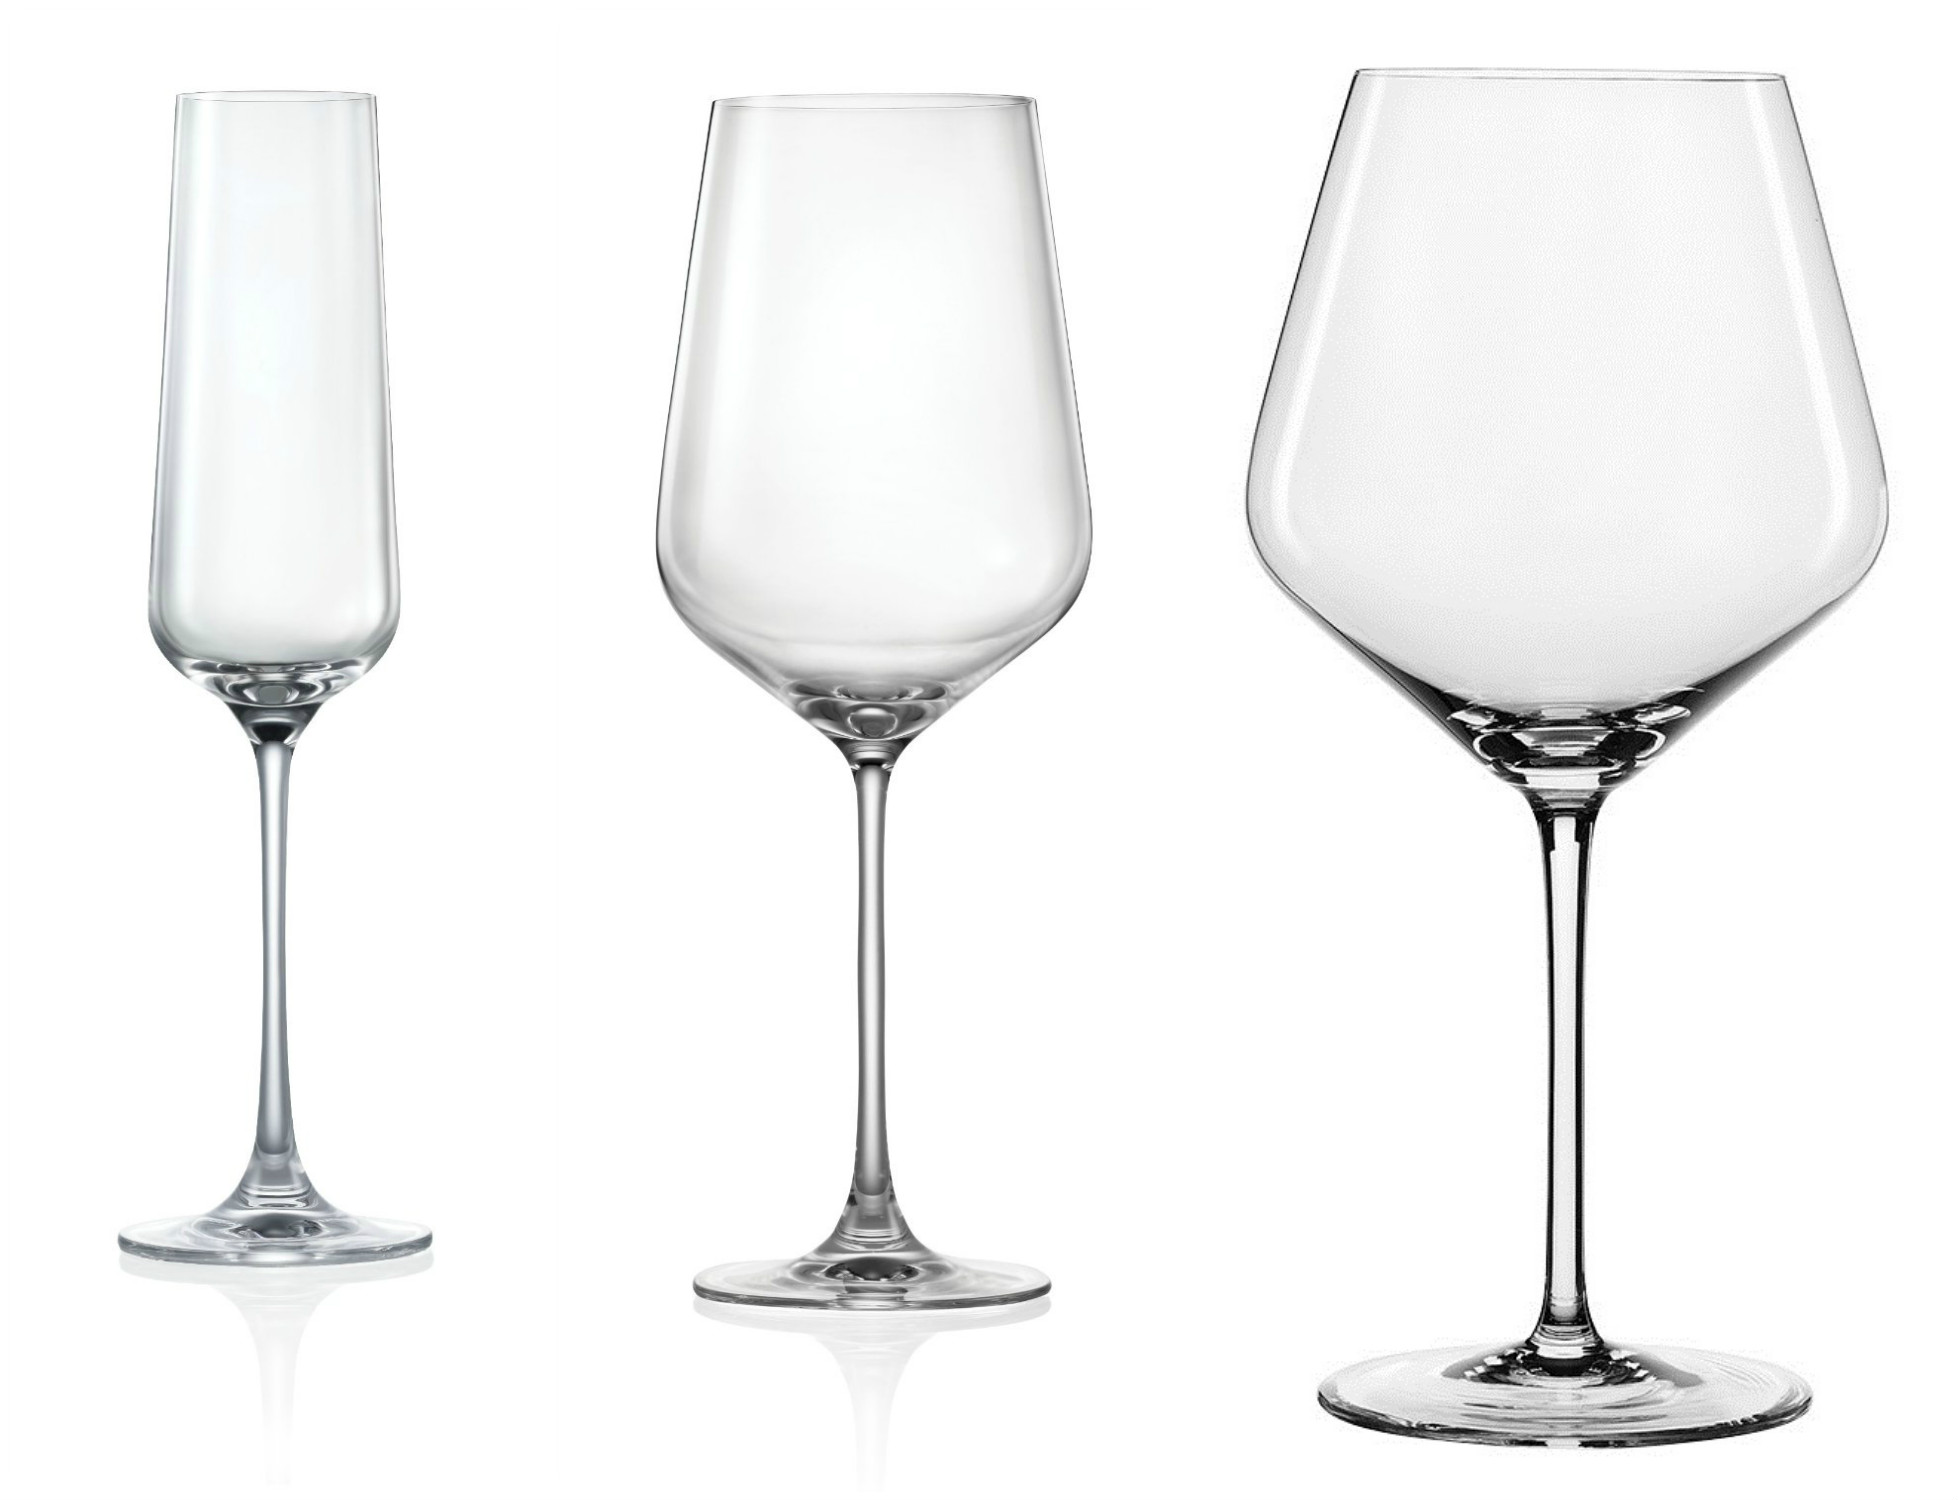 https://tlceventrentals.com/wp-content/uploads/2015/03/products-crystal_glassware.jpg